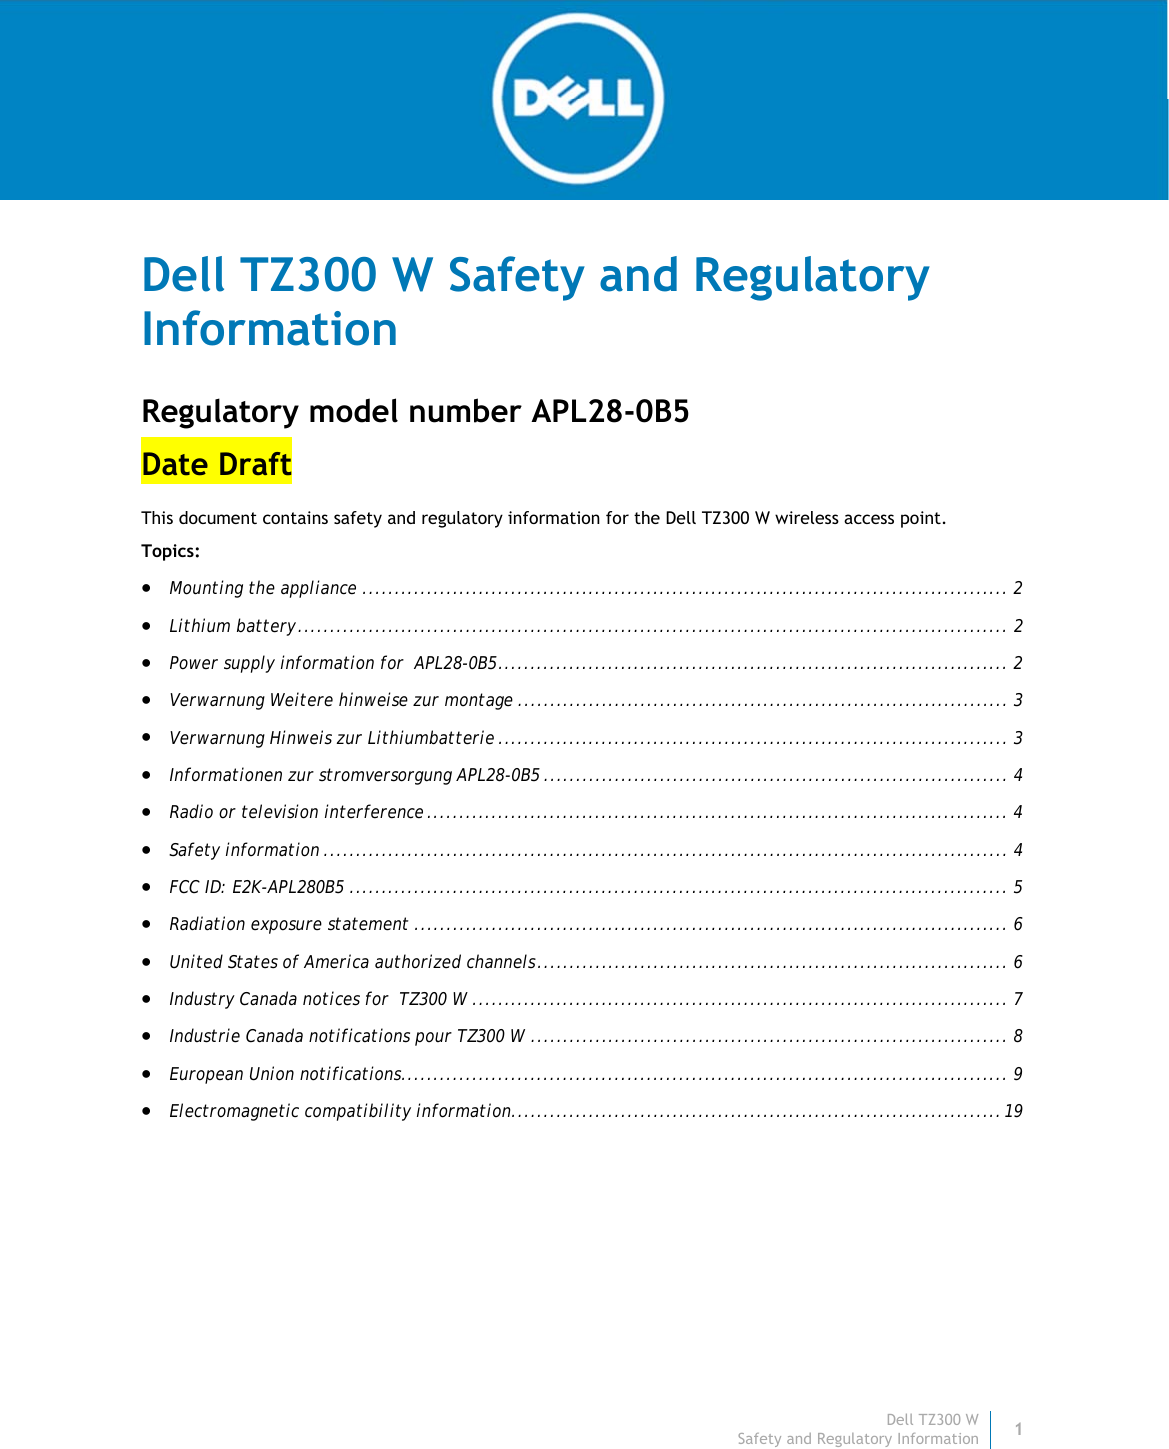 Dell TZ300 W1 Safety and Regulatory Information    Dell TZ300 W Safety and Regulatory Information Regulatory model number APL28-0B5 Date Draft This document contains safety and regulatory information for the Dell TZ300 W wireless access point.  Topics:   Mounting the appliance .................................................................................................... 2 Lithium battery .............................................................................................................. 2 Power supply information for  APL28-0B5 ............................................................................... 2 Verwarnung Weitere hinweise zur montage ............................................................................ 3 Verwarnung Hinweis zur Lithiumbatterie ............................................................................... 3 Informationen zur stromversorgung APL28-0B5 ........................................................................ 4 Radio or television interference .......................................................................................... 4 Safety information .......................................................................................................... 4 FCC ID: E2K-APL280B5 ...................................................................................................... 5 Radiation exposure statement ............................................................................................ 6 United States of America authorized channels ......................................................................... 6 Industry Canada notices for  TZ300 W ................................................................................... 7 Industrie Canada notifications pour TZ300 W .......................................................................... 8 European Union notifications .............................................................................................. 9 Electromagnetic compatibility information............................................................................ 19    